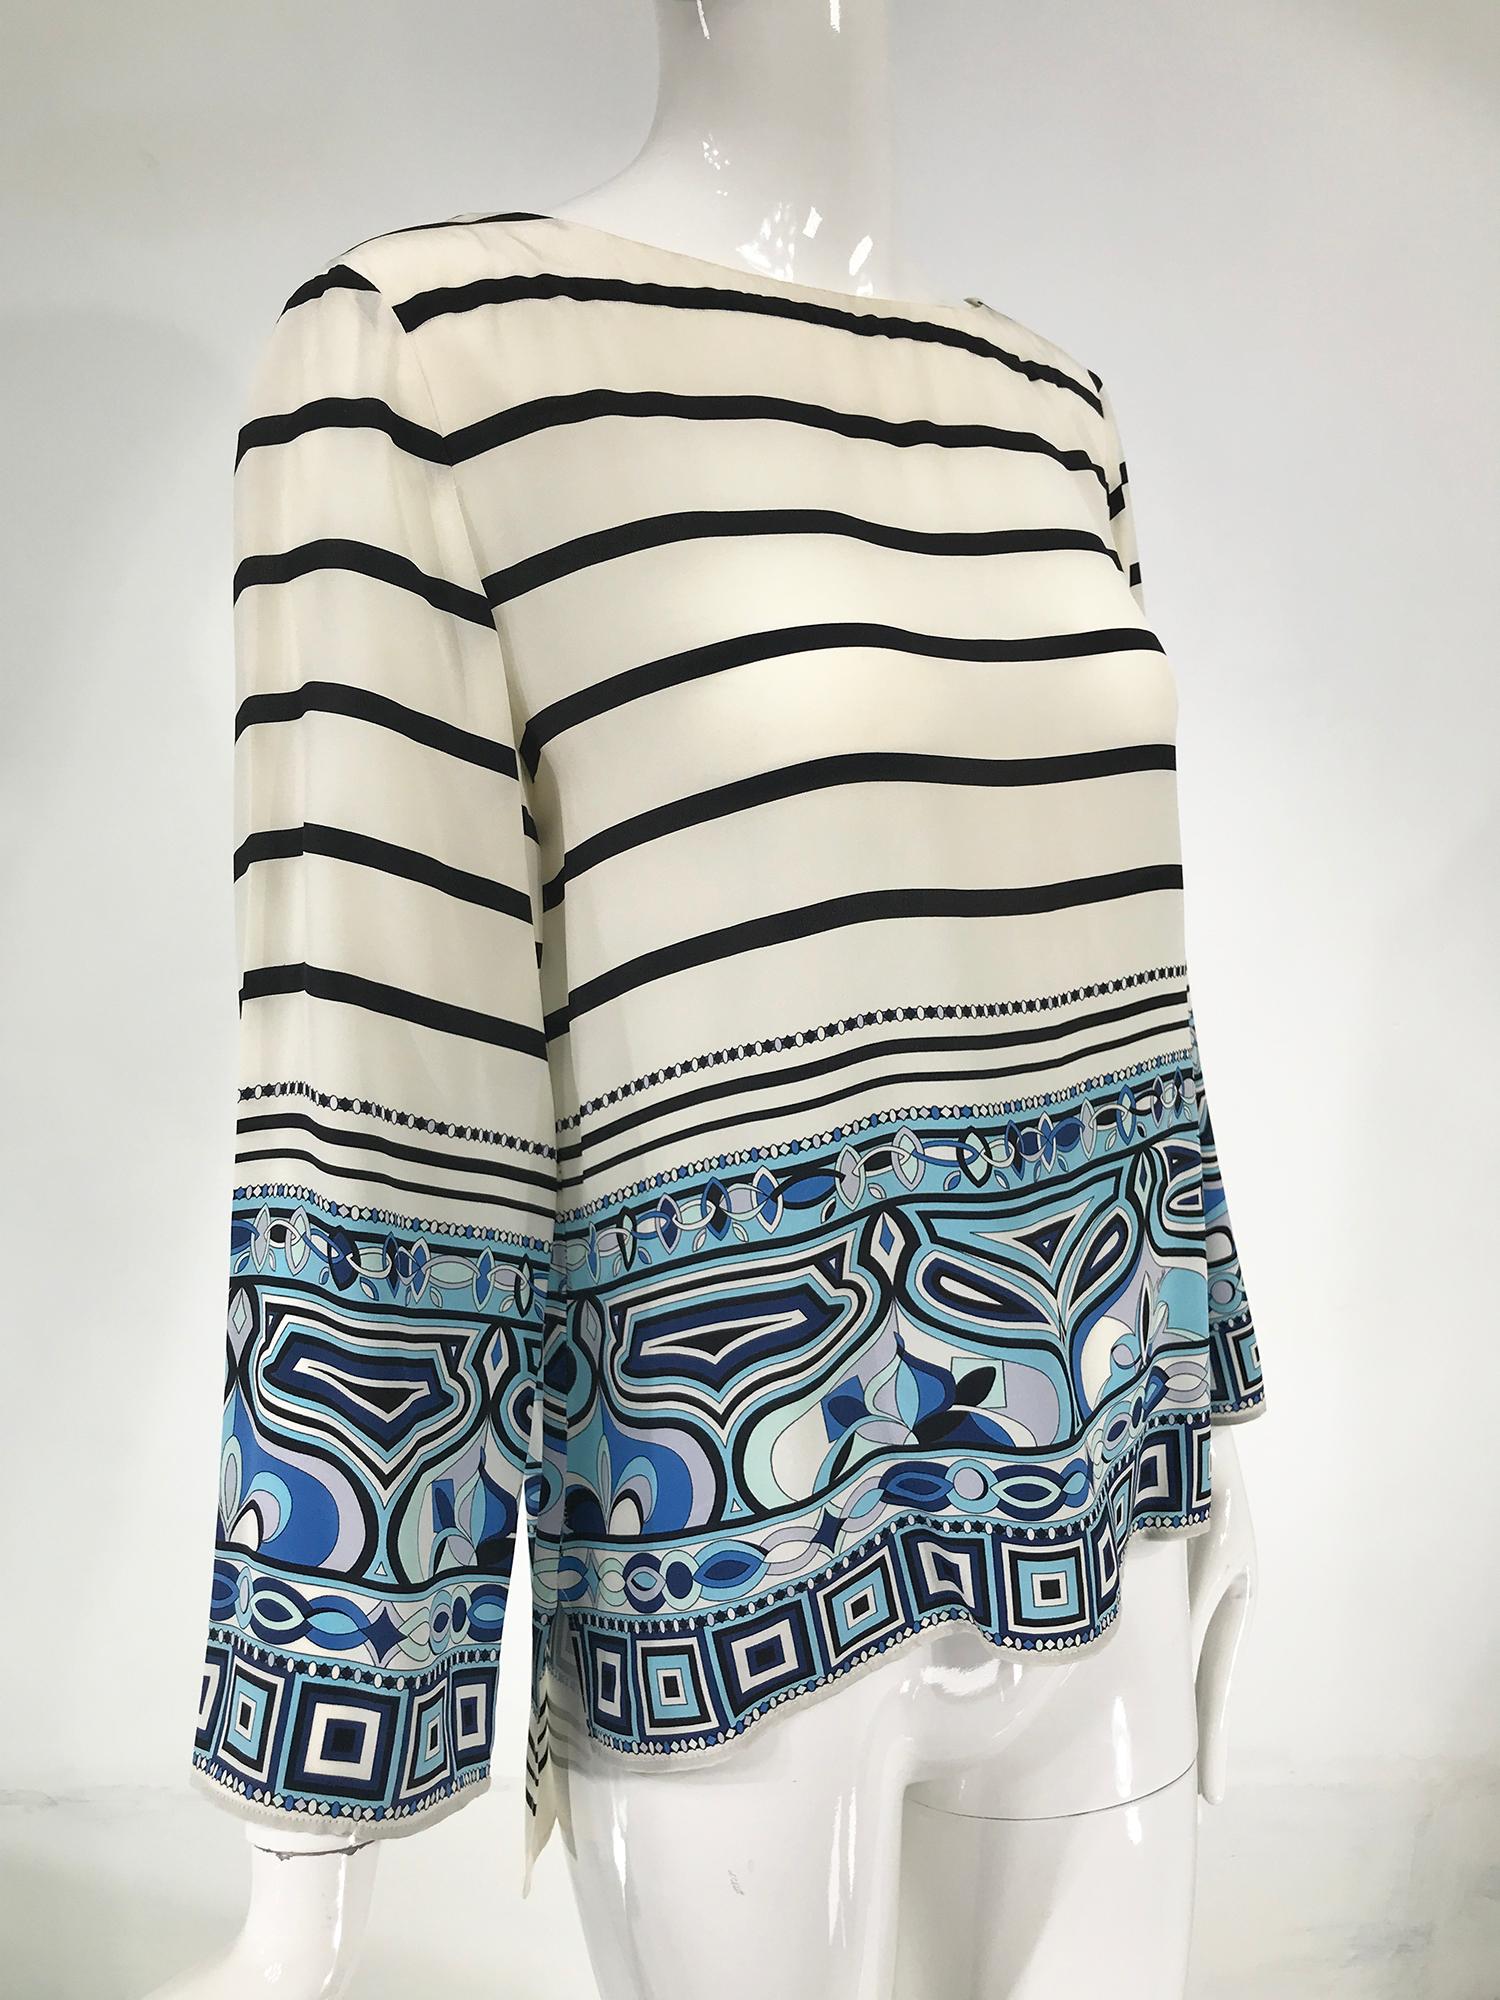 Pucci off white bateau neck black striped Pucci border print silk top. Long sleeve black and off white stripe top with a wide hem and sleeve border print in blue, black and off white. Lightweight silk is perfect for summer. Pull on top, the front